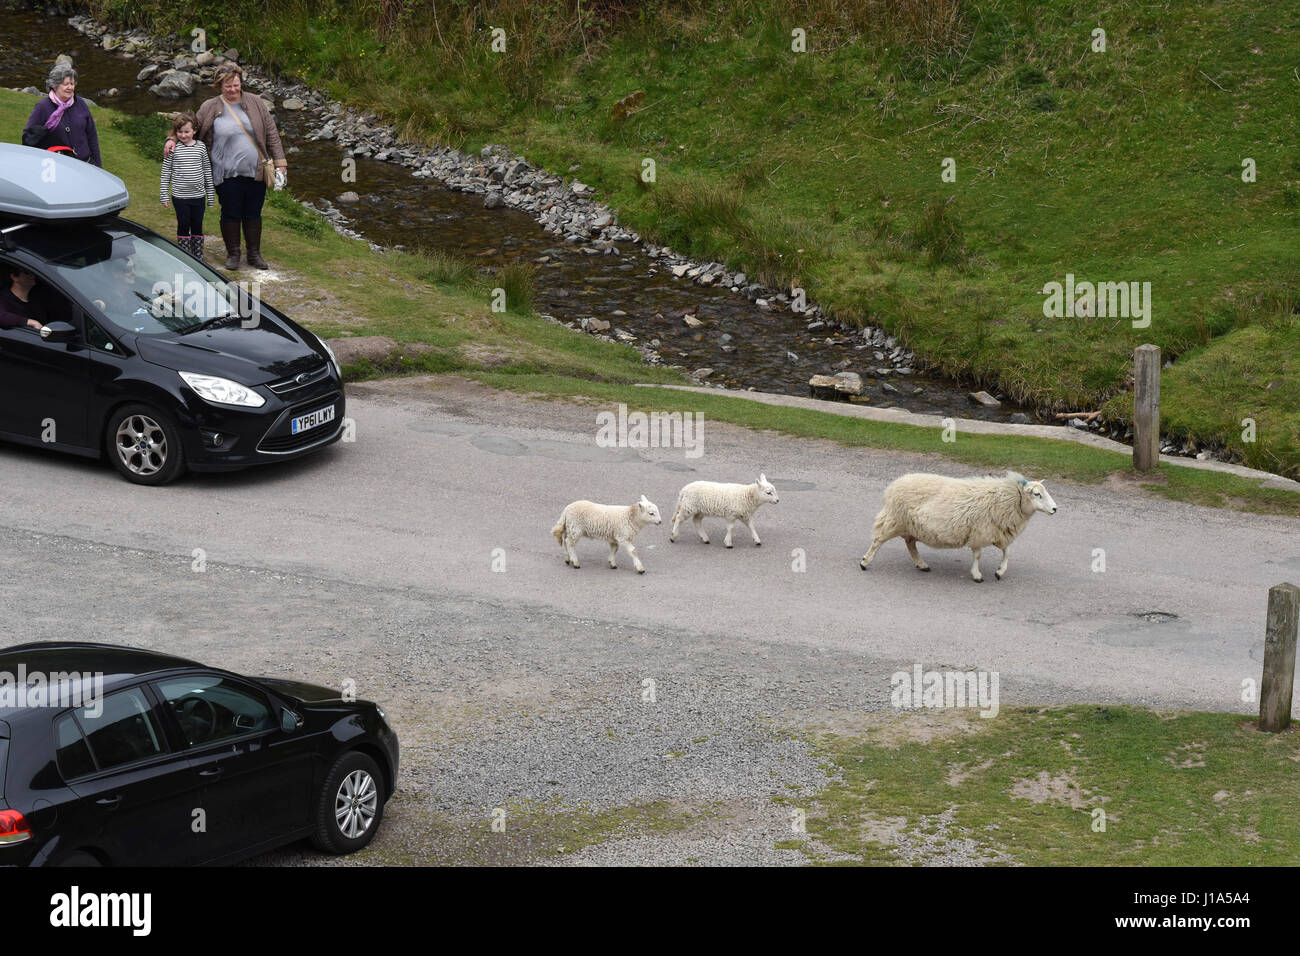 Young lambs following mum as motorists in Carding Mill Valley wait patiently for them to cross the road. Stock Photo